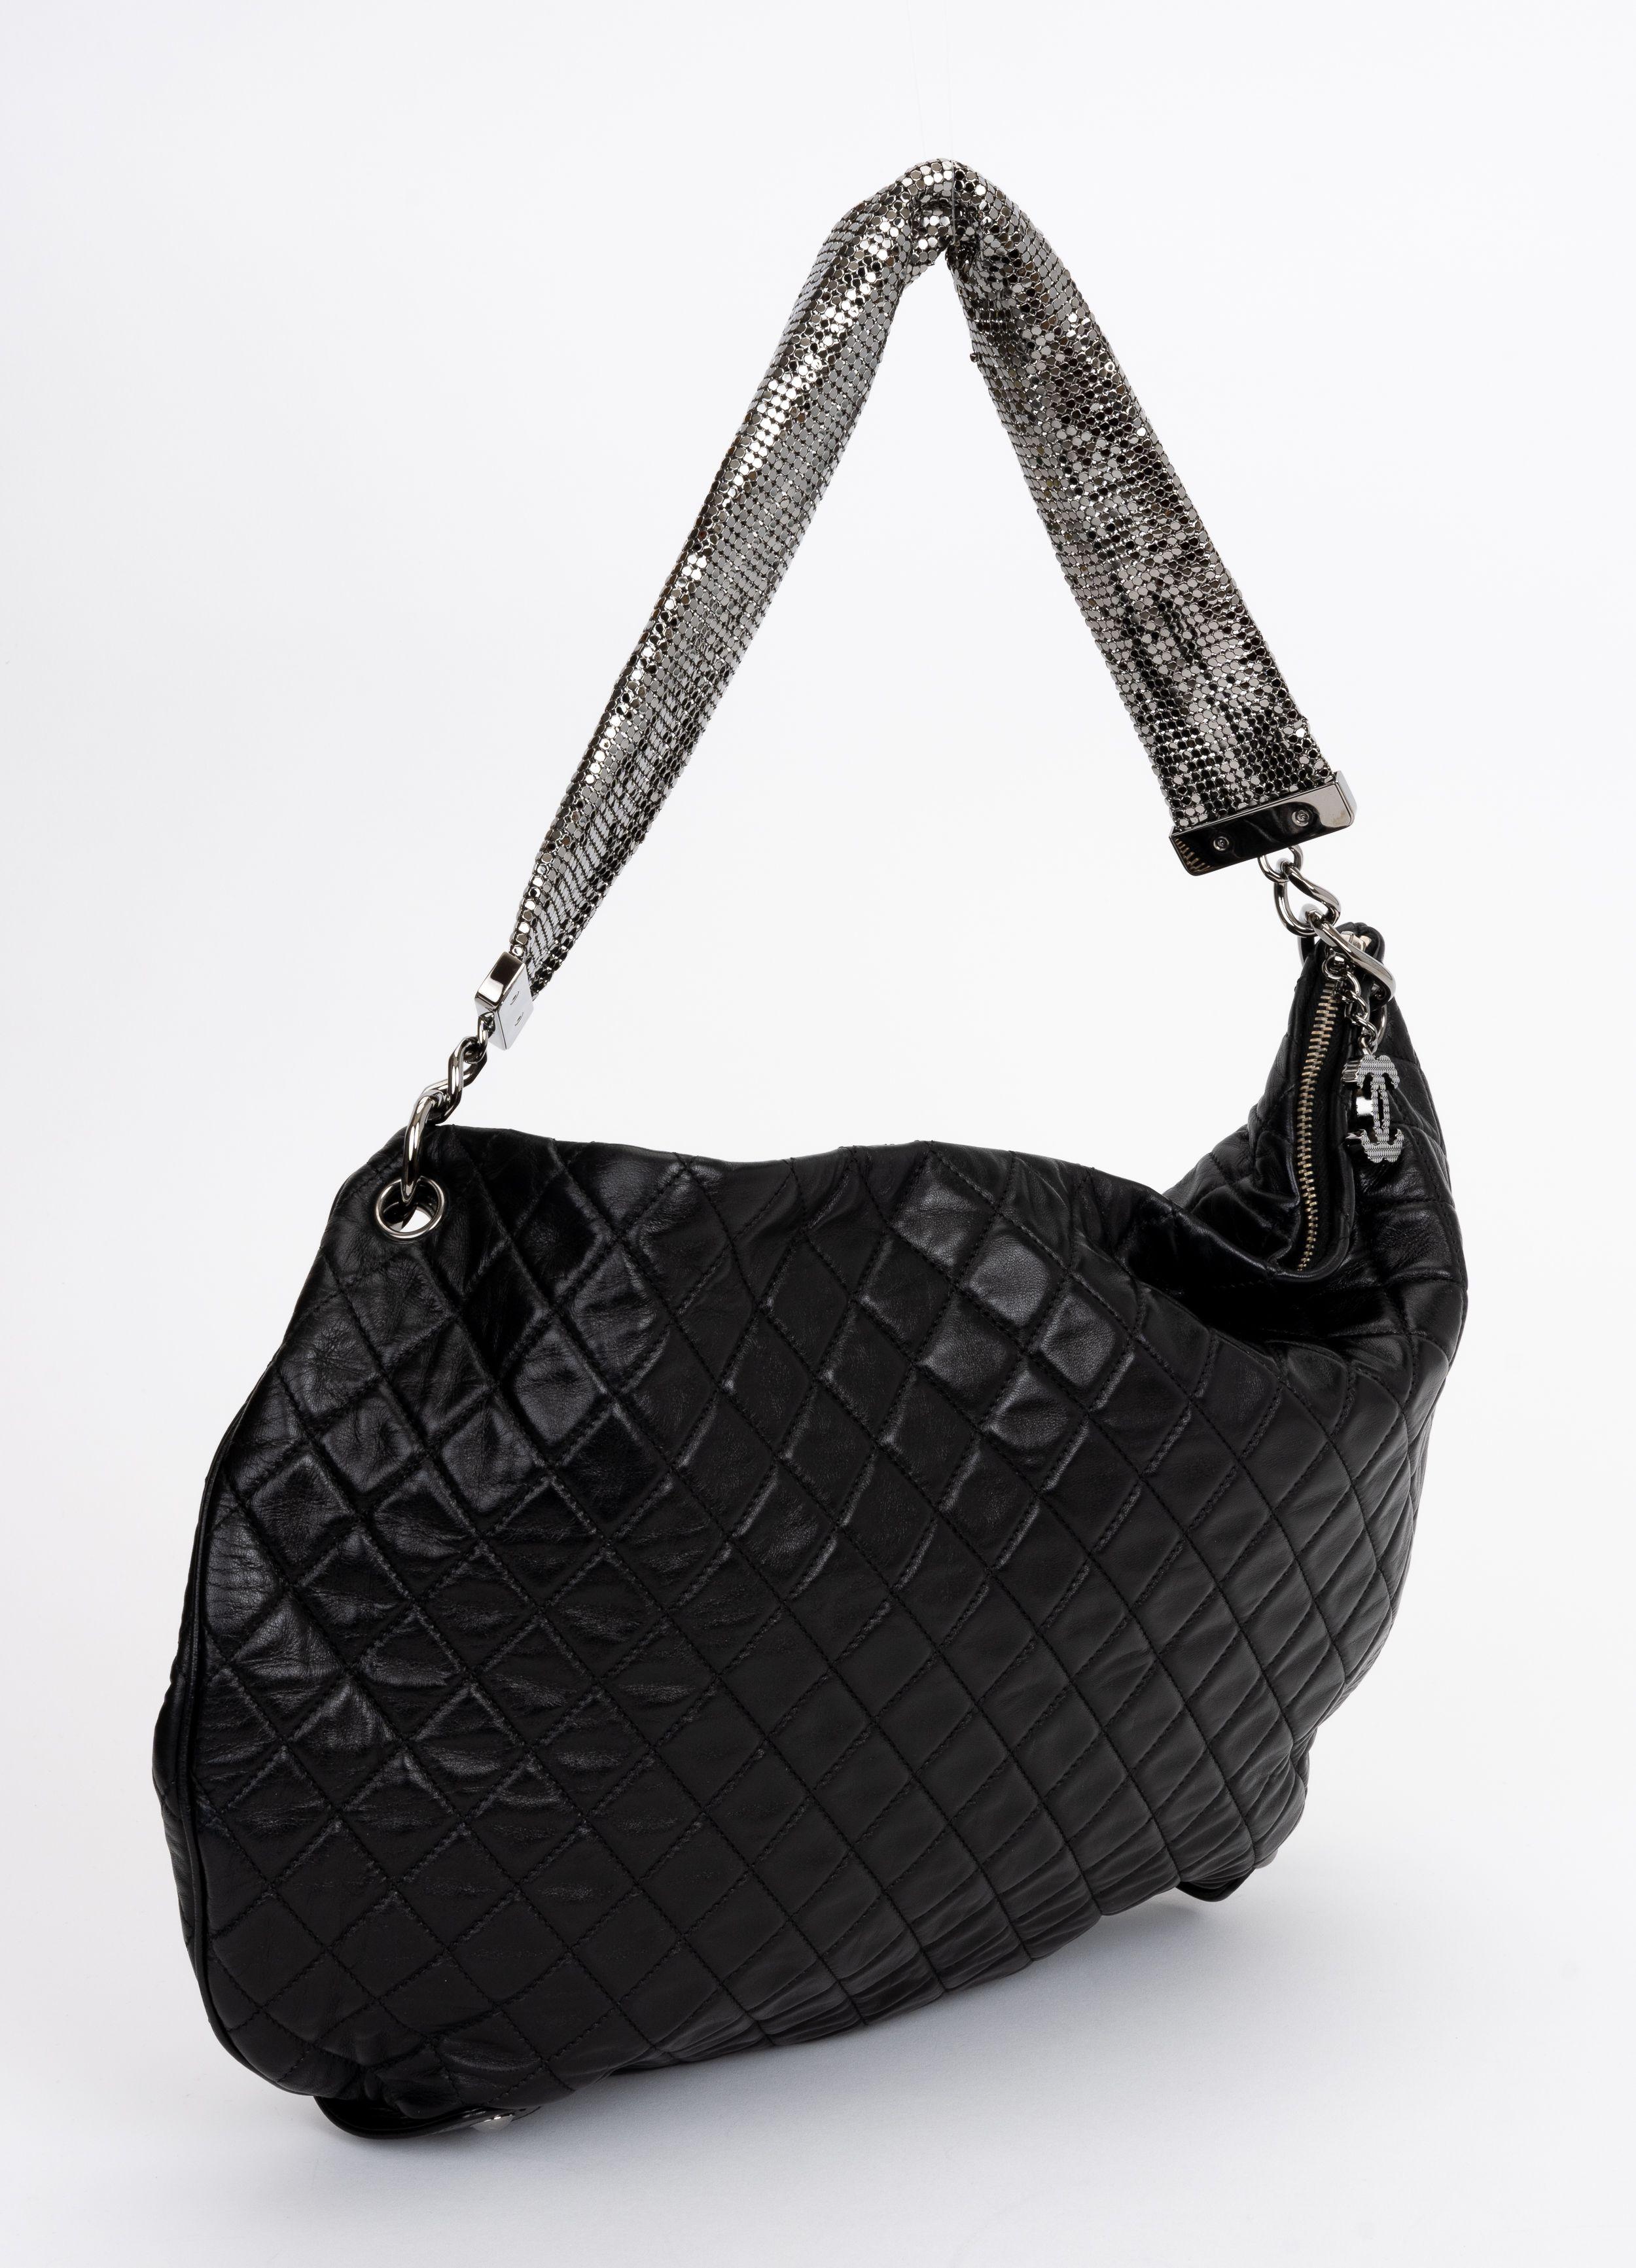 Chanel Black Mesh Chain Mail Bag For Sale 5